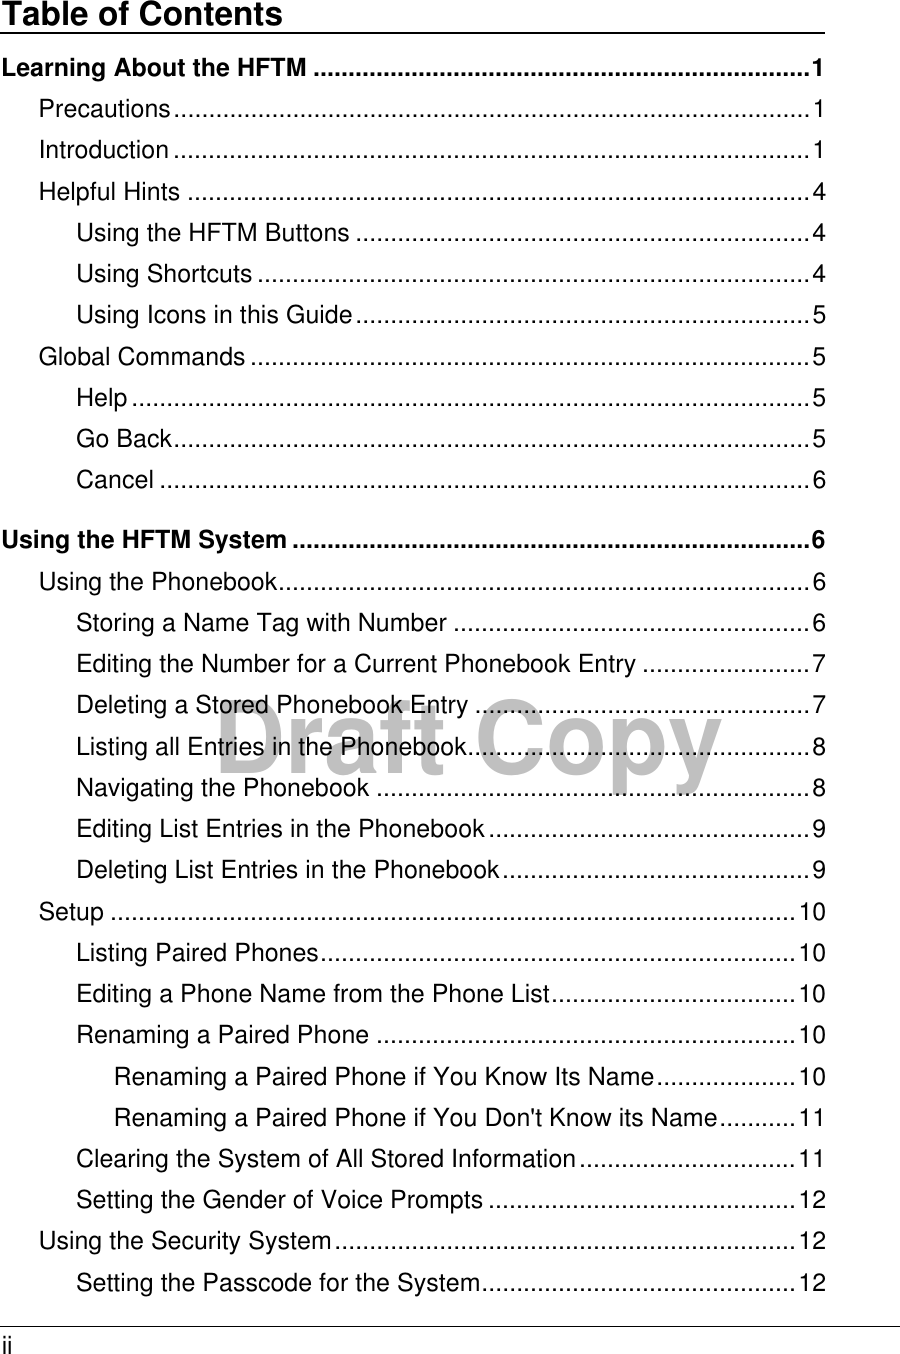 ii  Draft Copy Table of Contents Learning About the HFTM .......................................................................1 Precautions...........................................................................................1 Introduction...........................................................................................1 Helpful Hints .........................................................................................4 Using the HFTM Buttons .................................................................4 Using Shortcuts ...............................................................................4 Using Icons in this Guide.................................................................5 Global Commands ................................................................................5 Help.................................................................................................5 Go Back...........................................................................................5 Cancel .............................................................................................6 Using the HFTM System ..........................................................................6 Using the Phonebook............................................................................6 Storing a Name Tag with Number ...................................................6 Editing the Number for a Current Phonebook Entry ........................7 Deleting a Stored Phonebook Entry ................................................7 Listing all Entries in the Phonebook.................................................8 Navigating the Phonebook ..............................................................8 Editing List Entries in the Phonebook..............................................9 Deleting List Entries in the Phonebook............................................9 Setup ..................................................................................................10 Listing Paired Phones....................................................................10 Editing a Phone Name from the Phone List...................................10 Renaming a Paired Phone ............................................................10 Renaming a Paired Phone if You Know Its Name....................10 Renaming a Paired Phone if You Don&apos;t Know its Name...........11 Clearing the System of All Stored Information...............................11 Setting the Gender of Voice Prompts ............................................12 Using the Security System..................................................................12 Setting the Passcode for the System.............................................12 